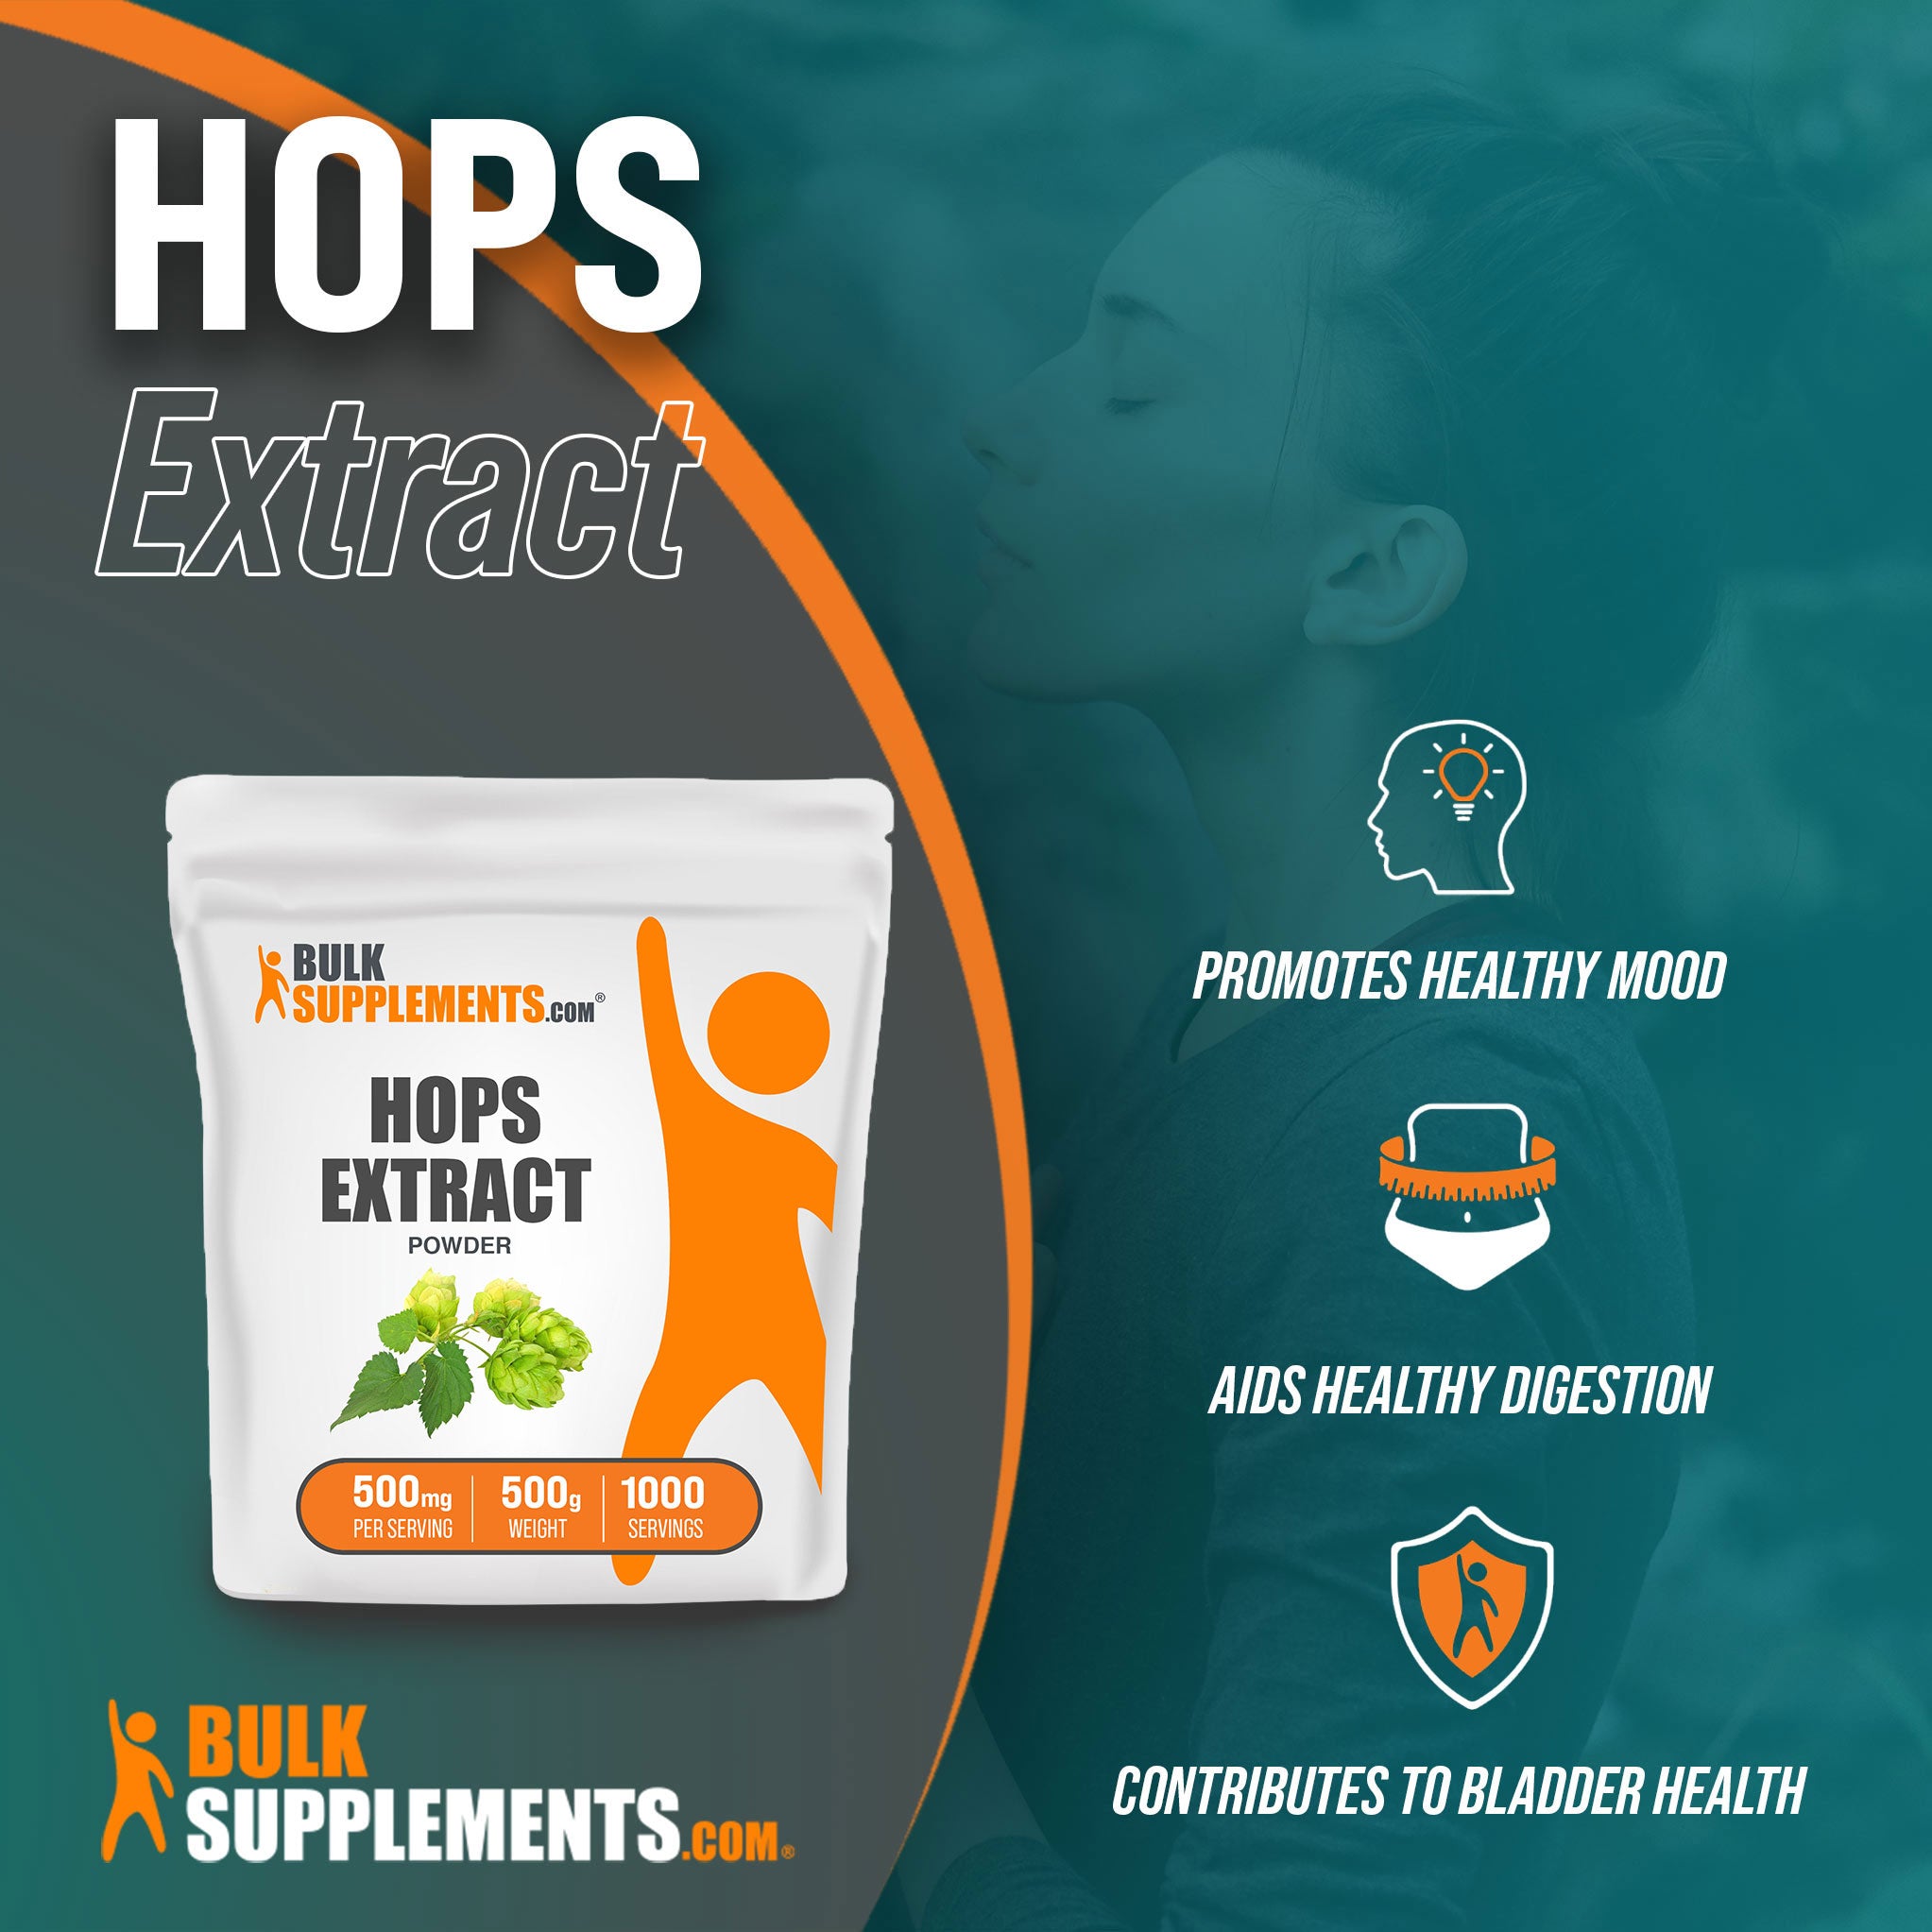 Benefits of Hops Extract; promotes healthy mood, aids healthy digestion, contributes to bladder health